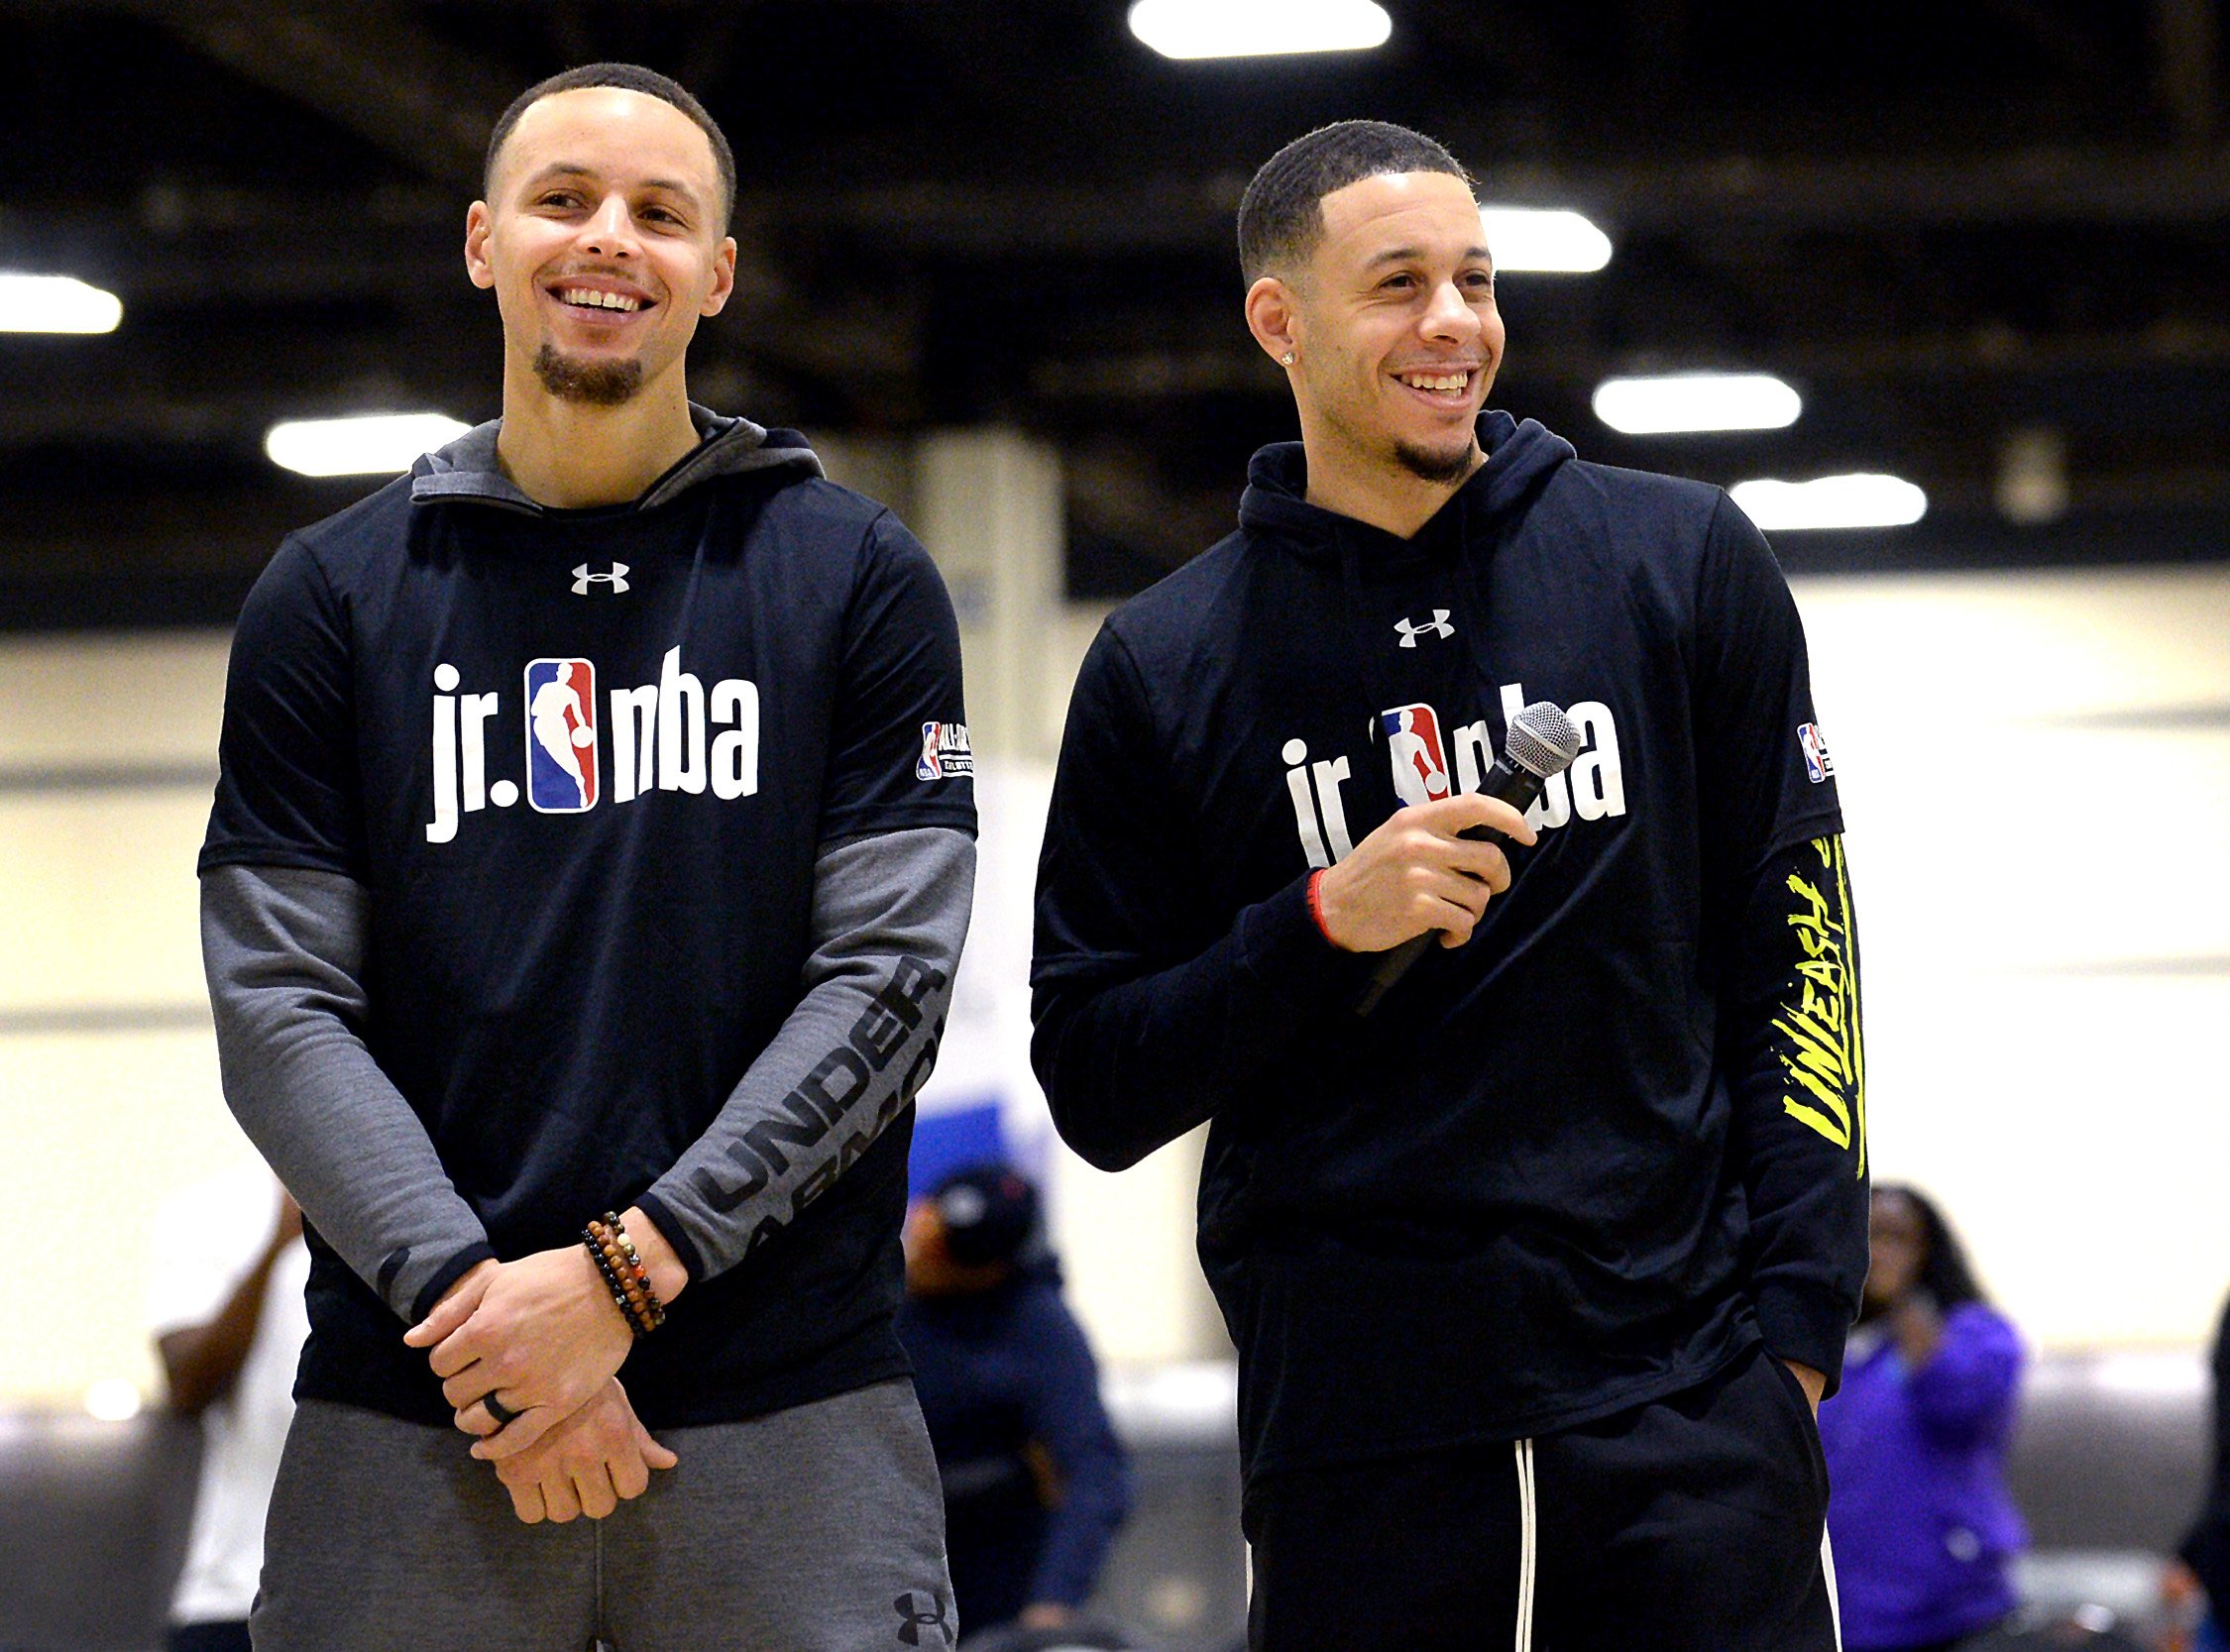 Brothers Steph Curry and Seth Curry speak to students at Fourth Annual Jr. NBA Day in Charlotte, North Carolina